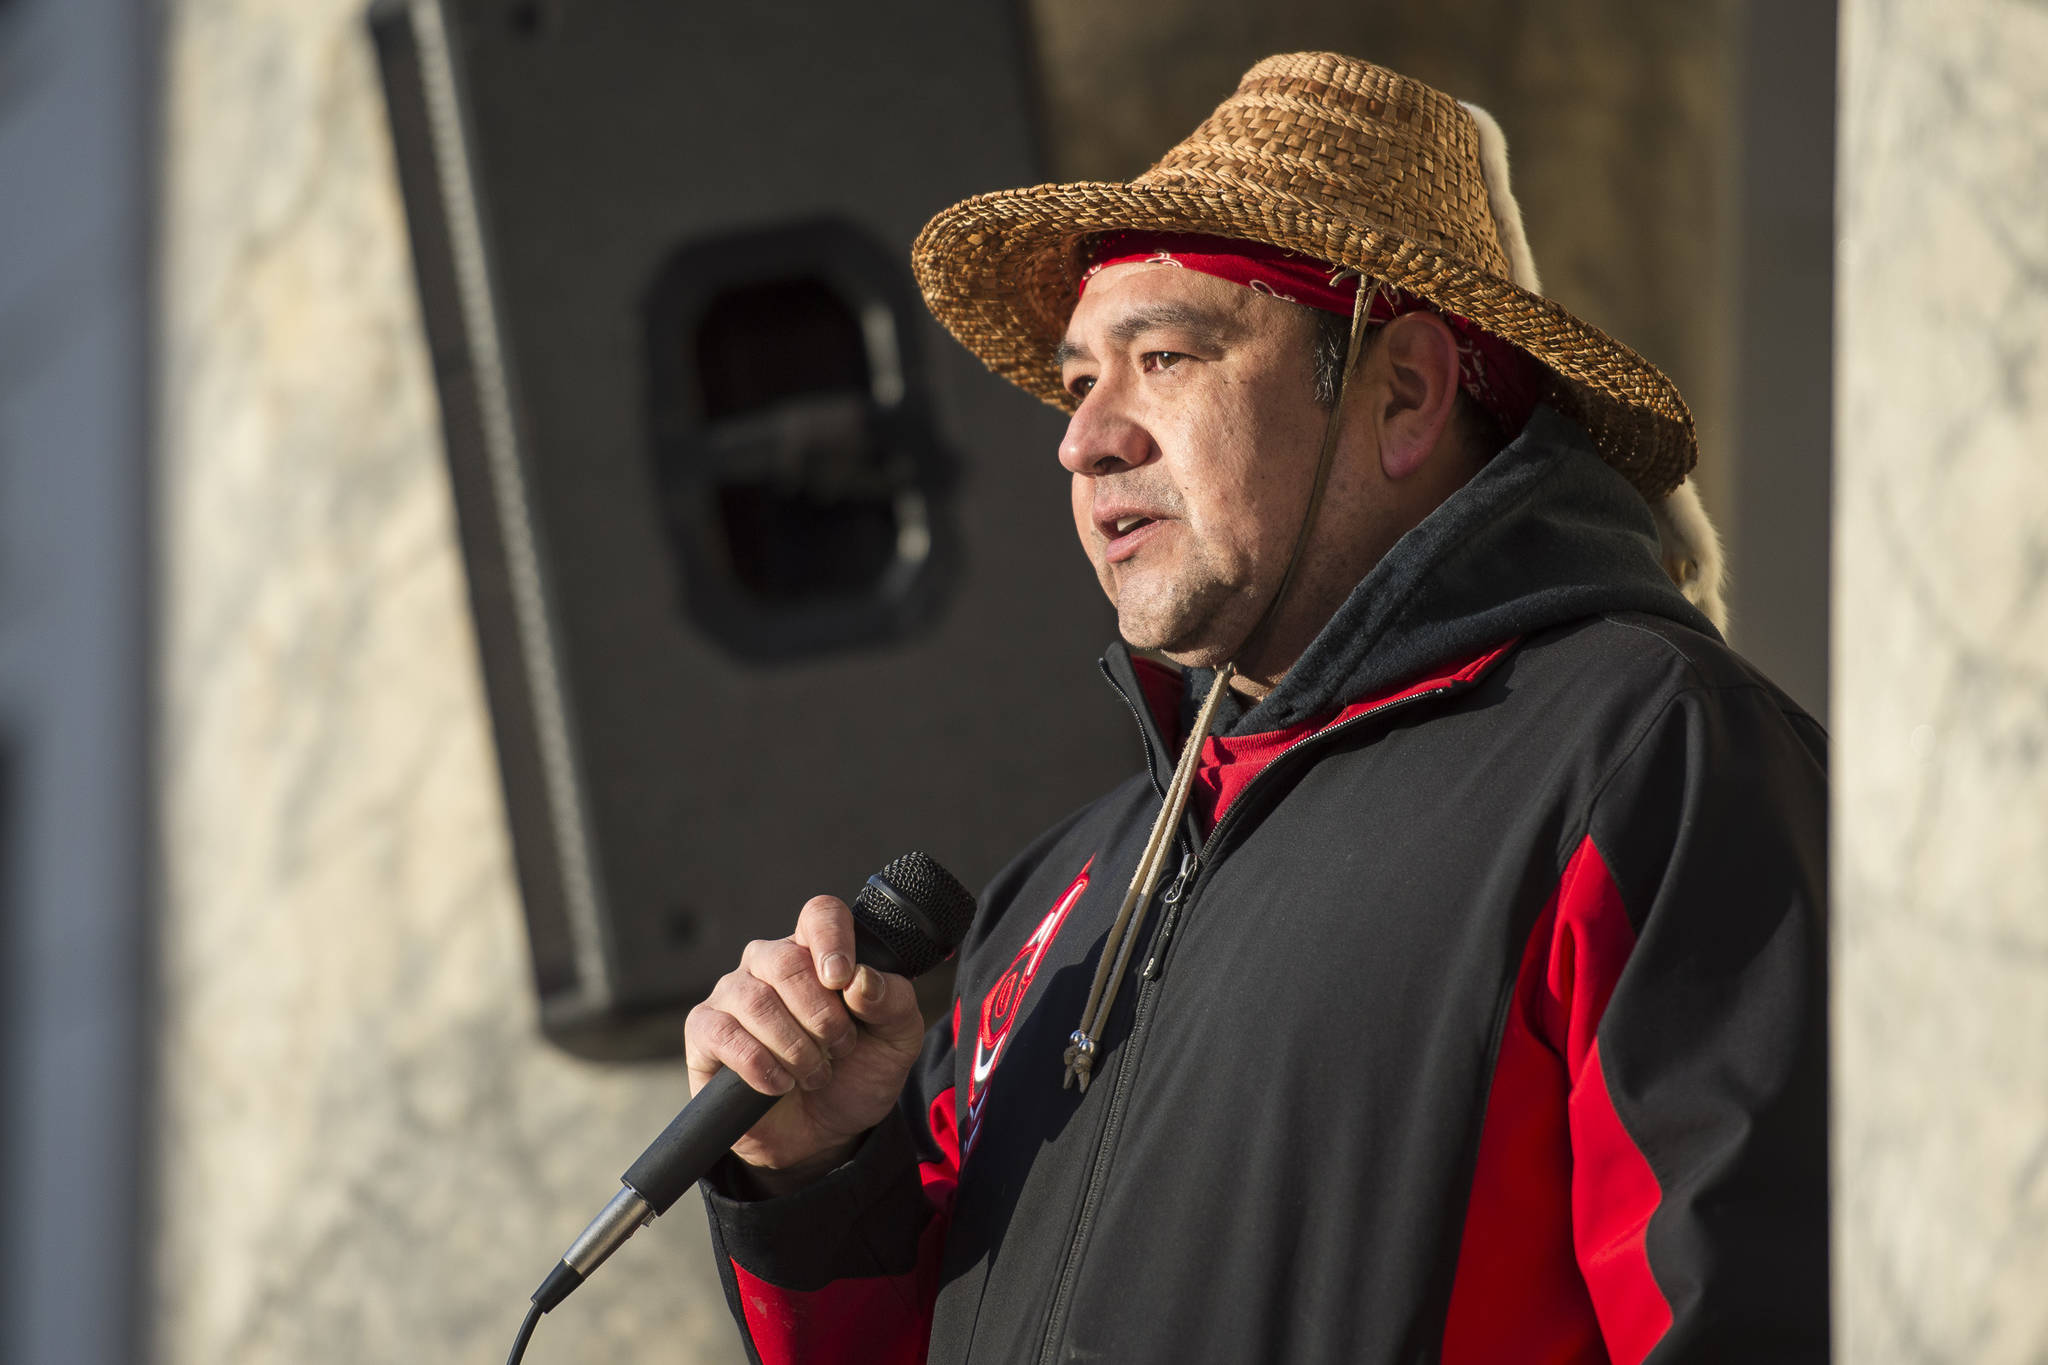 John Garcia speaks at the Women’s March on Juneau in front of the Alaska State Capitol on Saturday, Jan. 19, 2019. (Michael Penn | Juneau Empire)